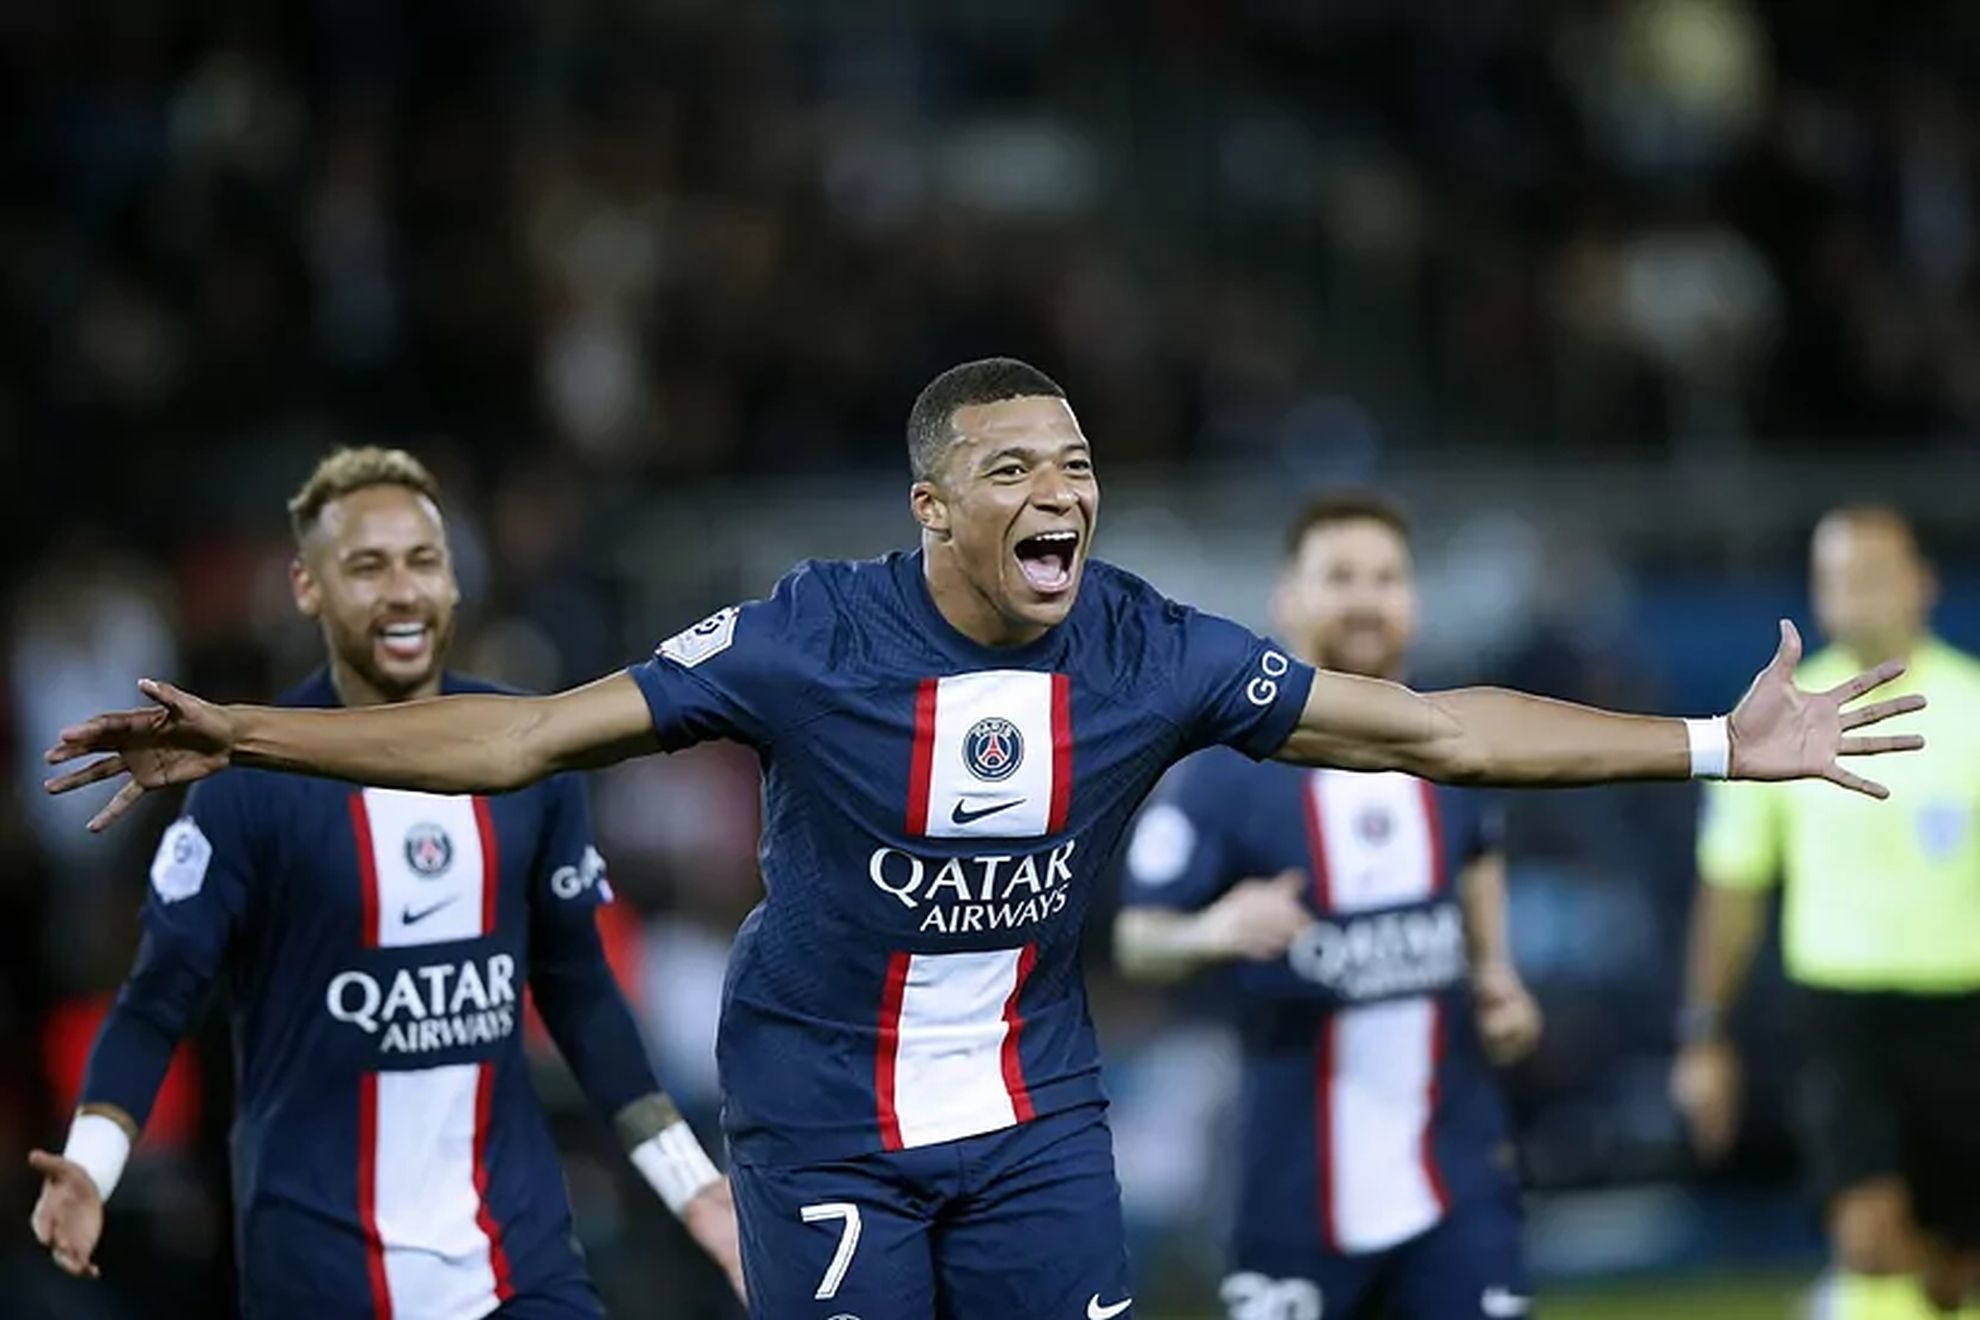 Mbappe and Messi earn PSG a narrow victory against Nice in Ligue 1